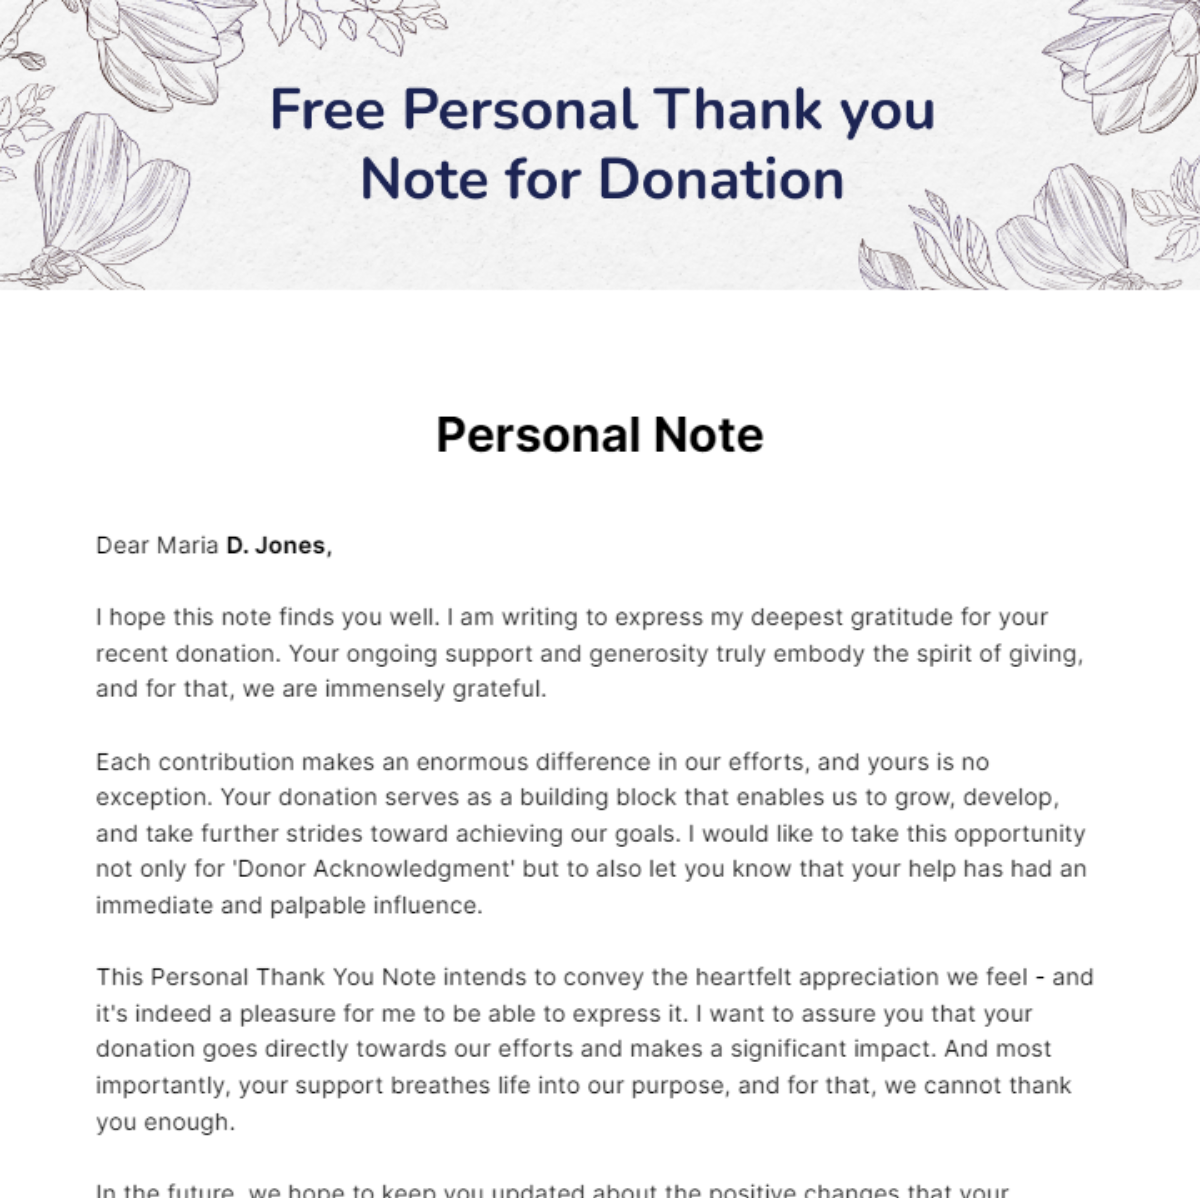 Free Personal Thank you Note for Donation Template